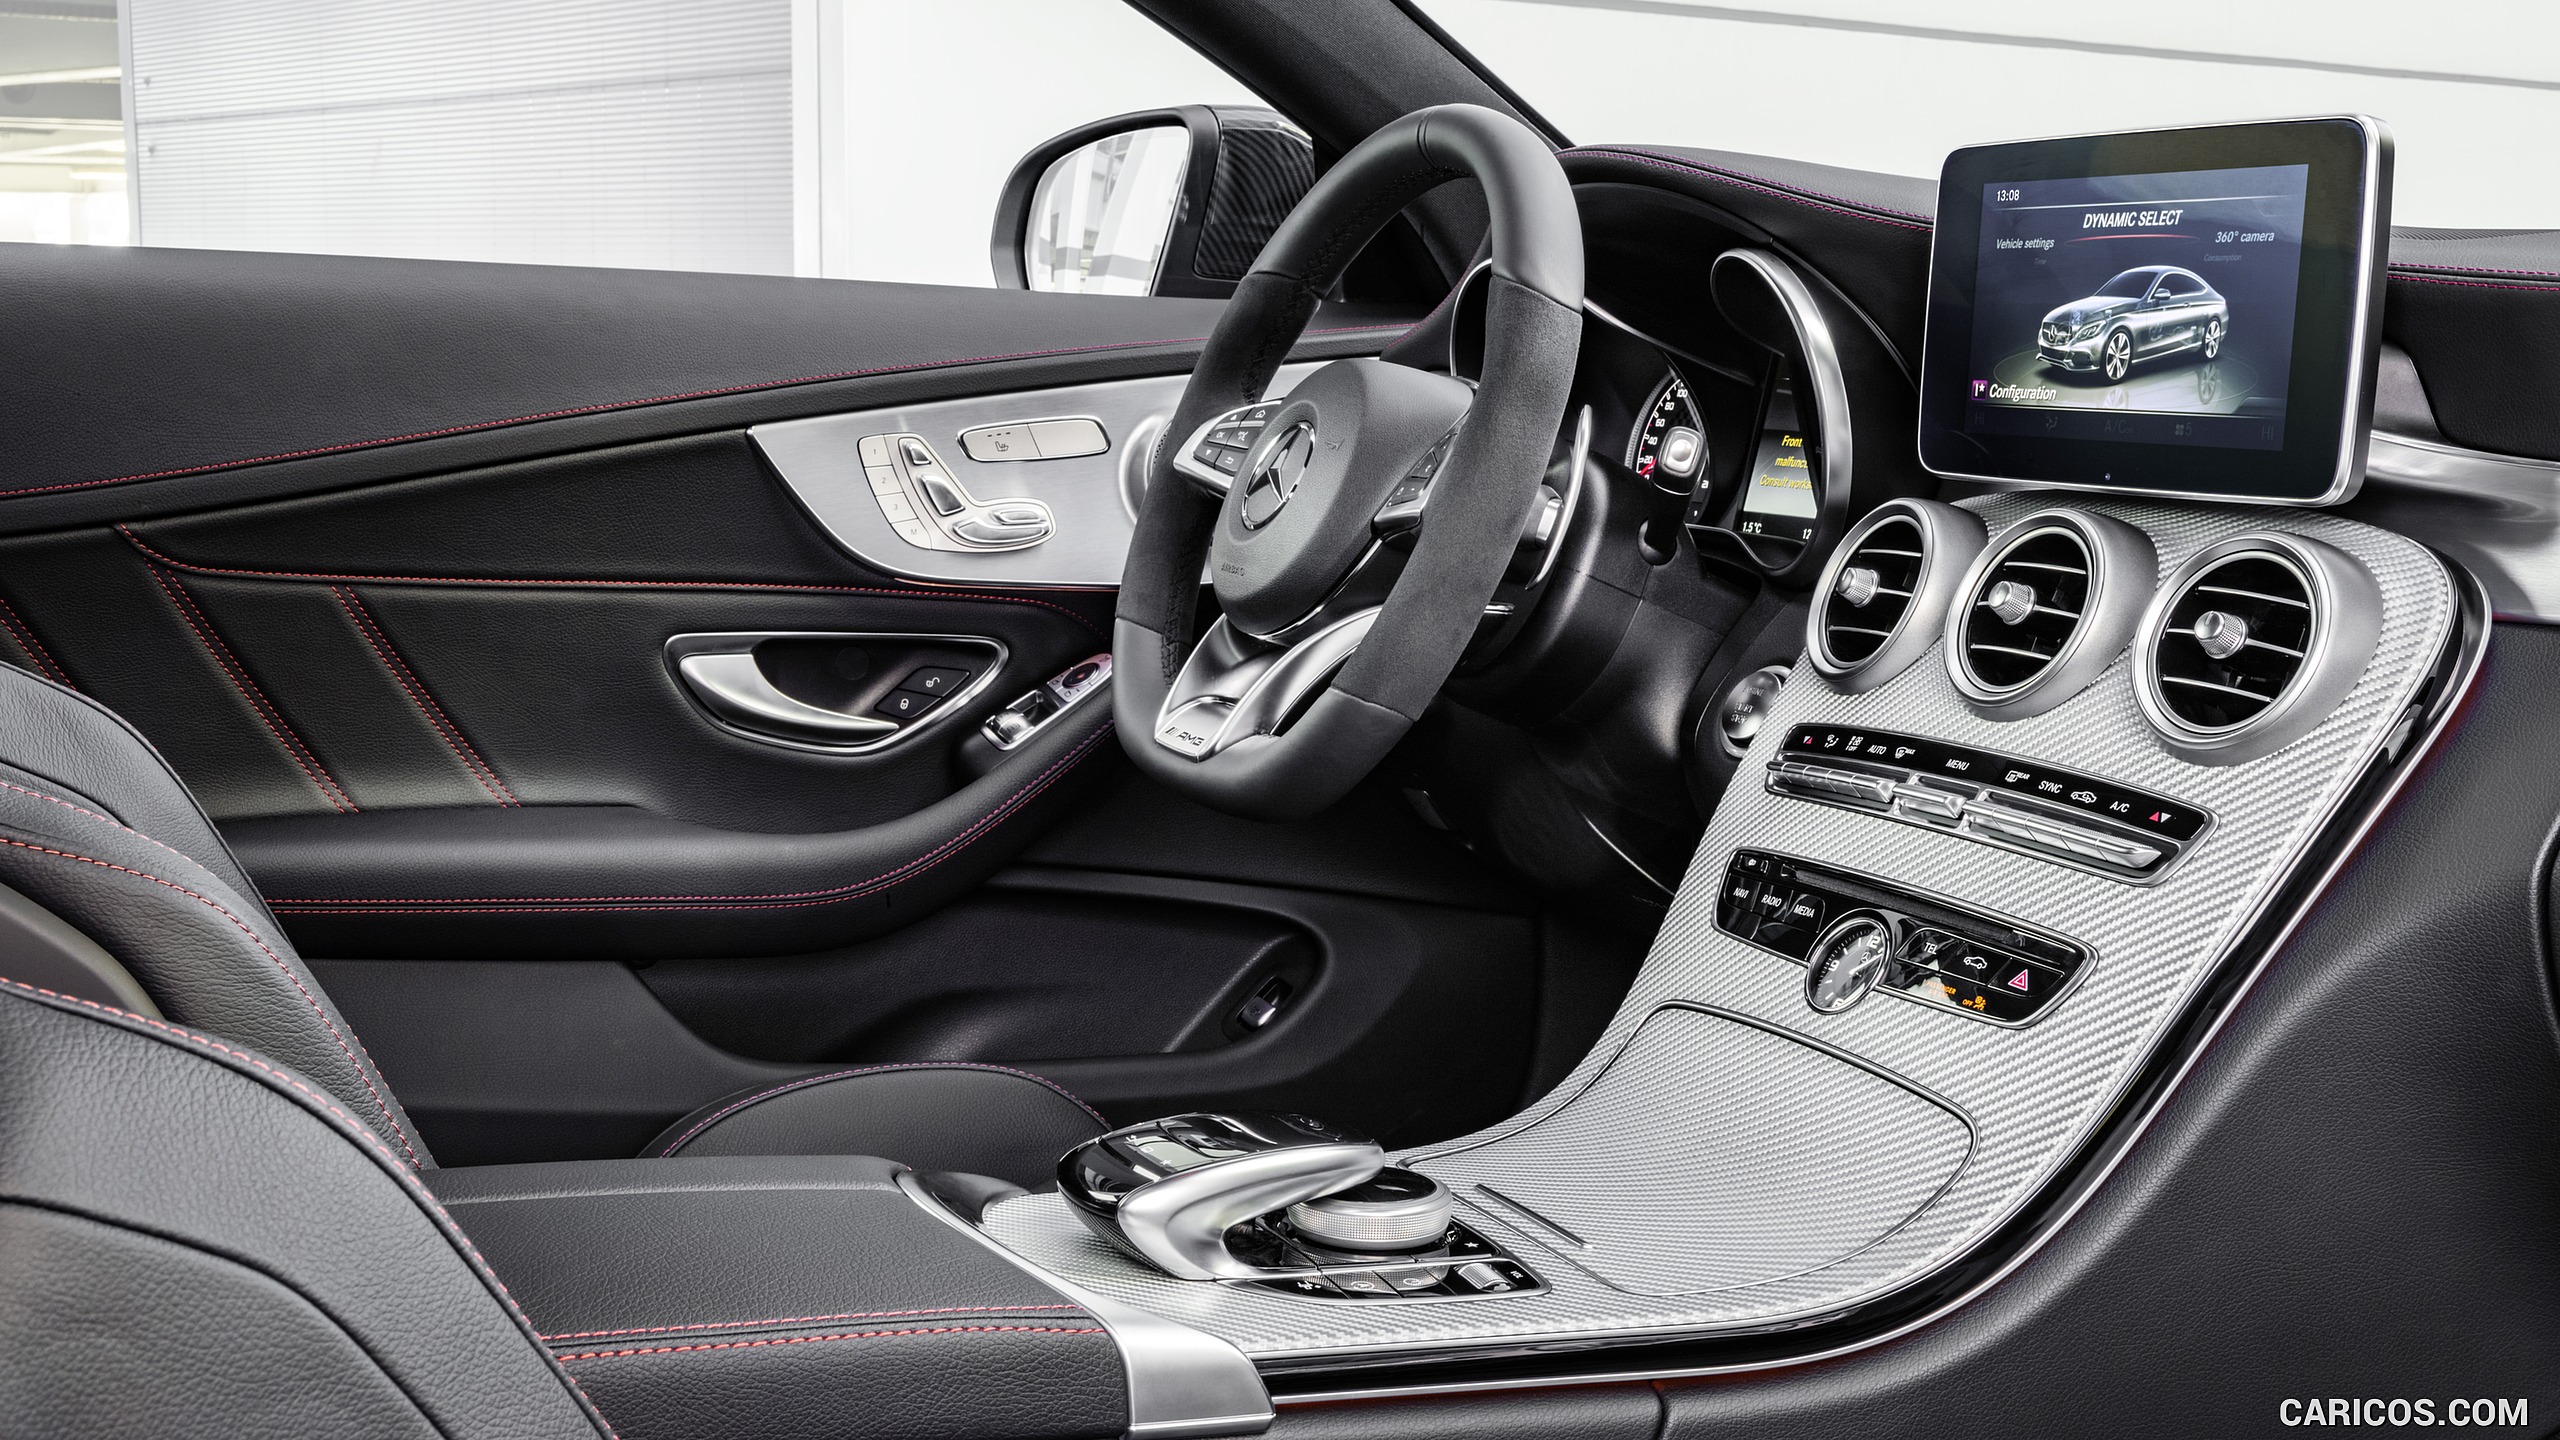 2017 Mercedes-AMG C43 4MATIC Coupé - Leather Black Interior, #11 of 30